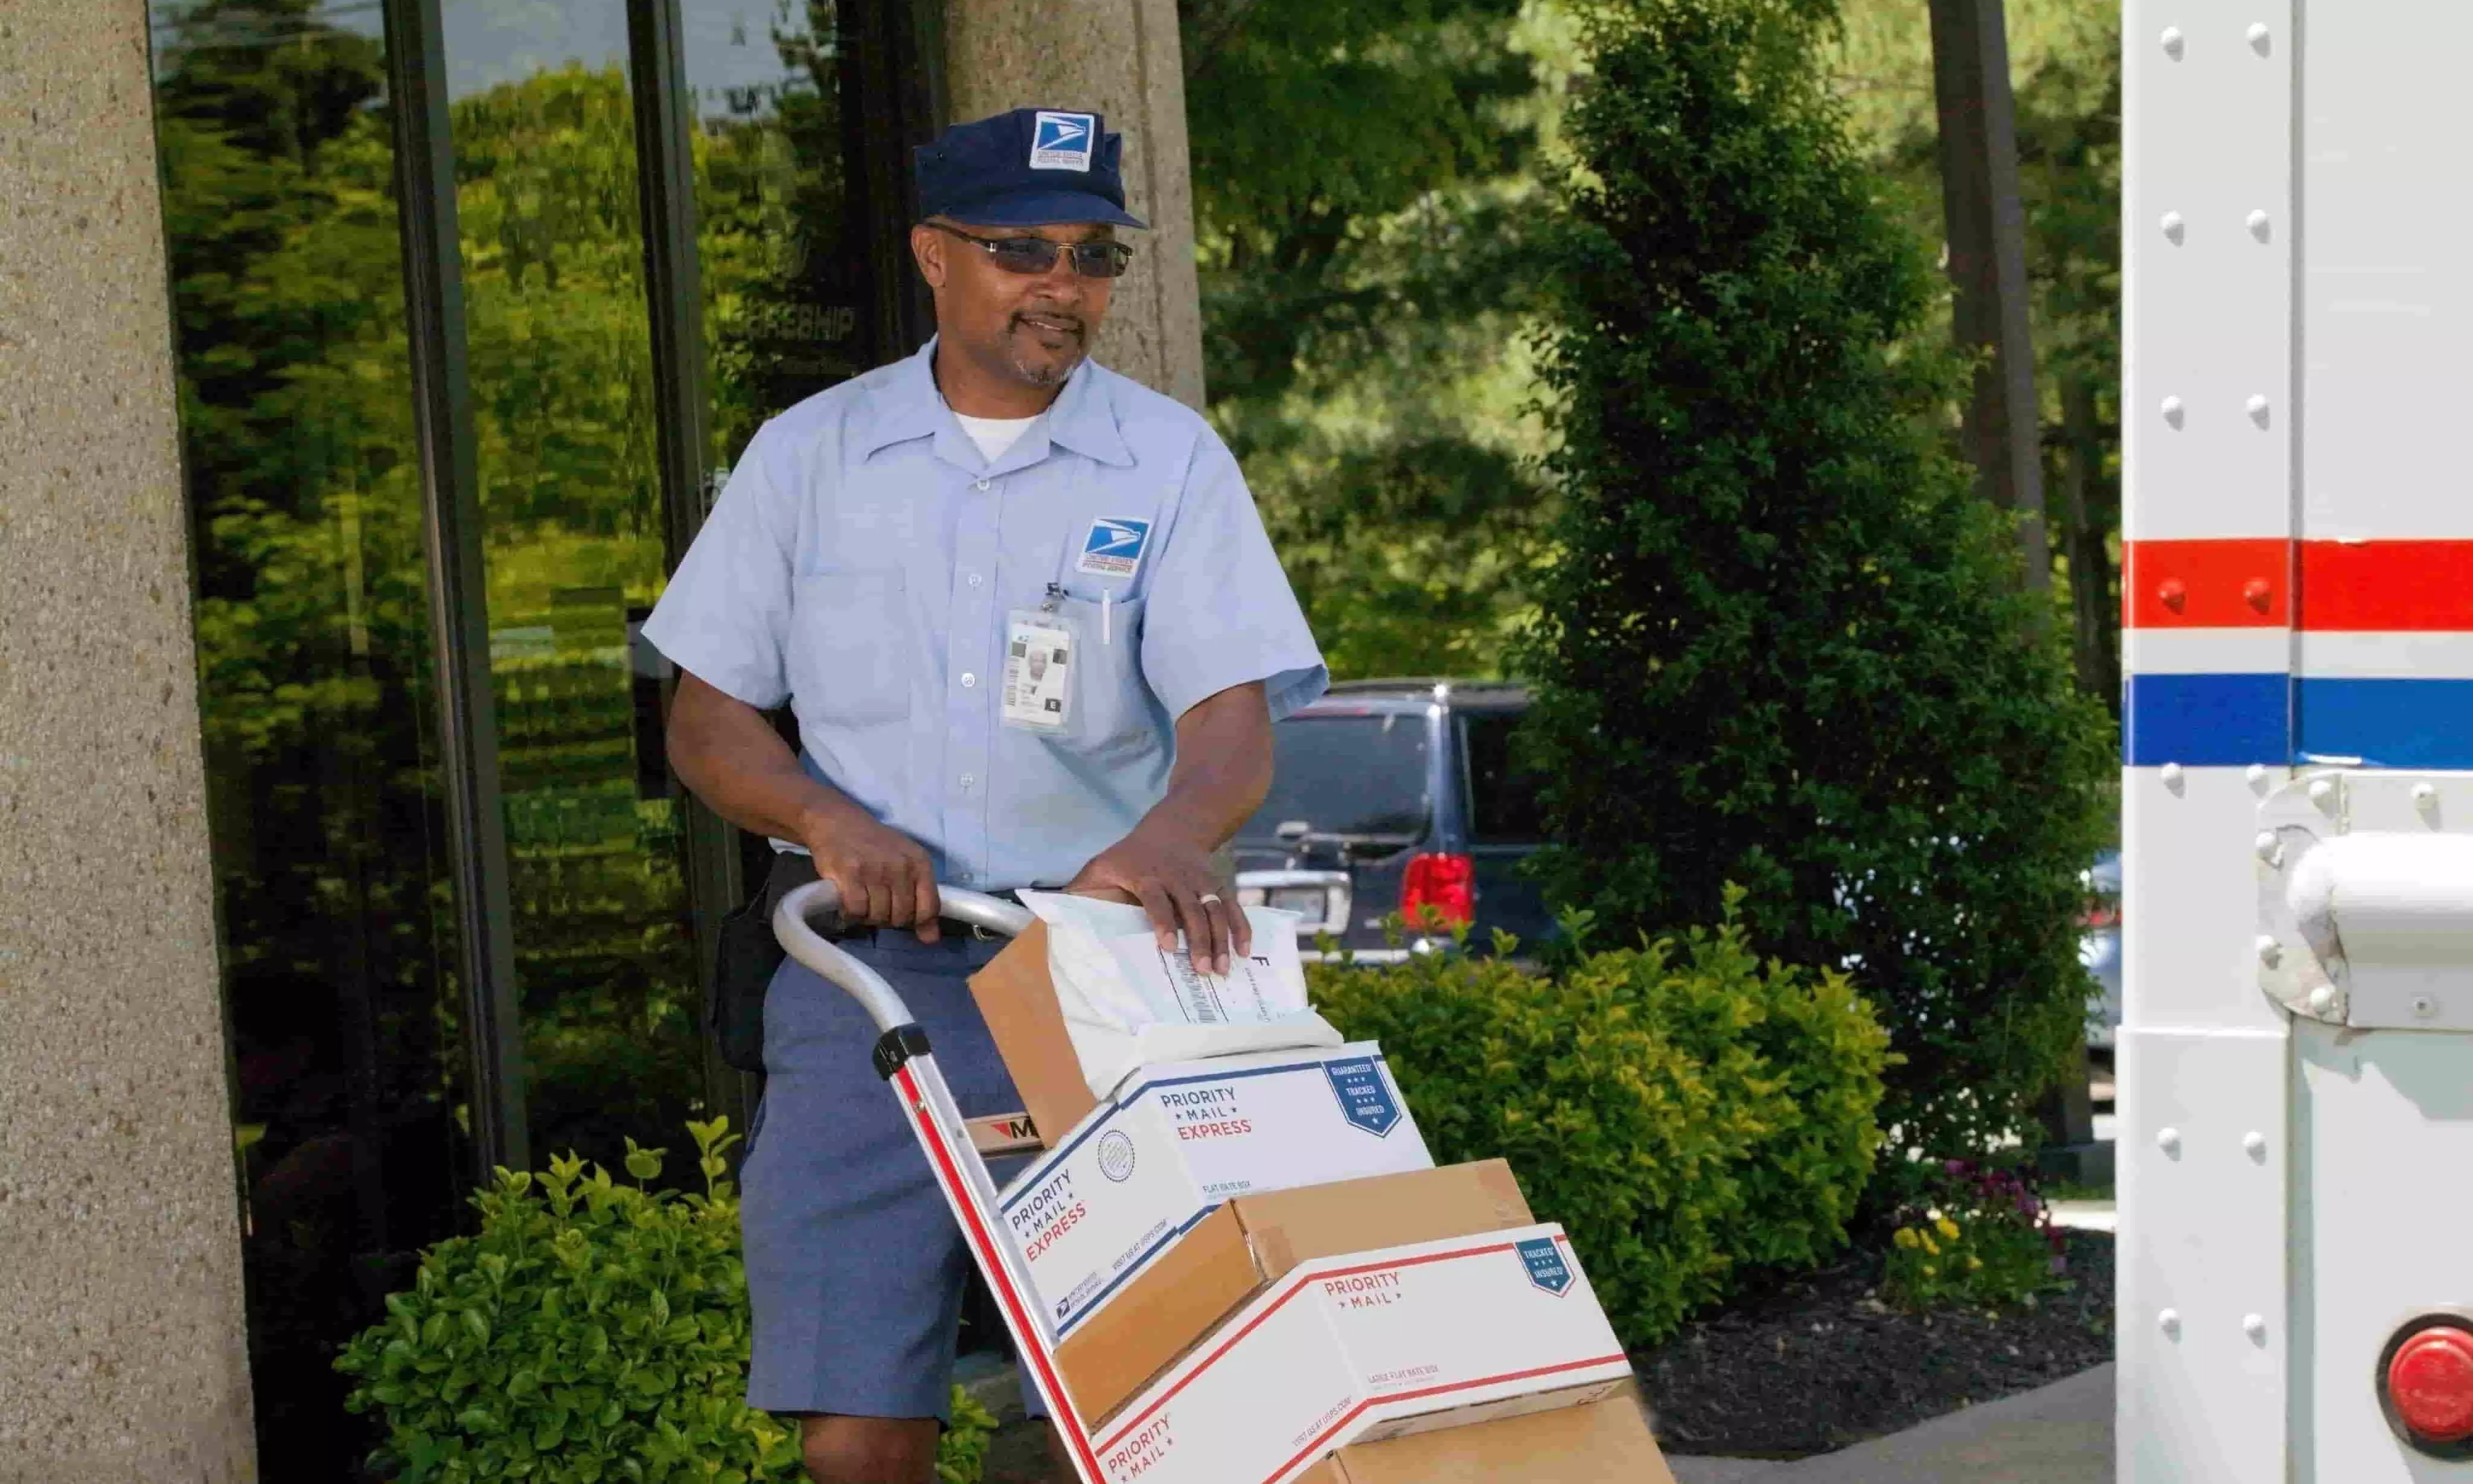 UPS replaces FedEx as US Postal Service’s primary air cargo provider